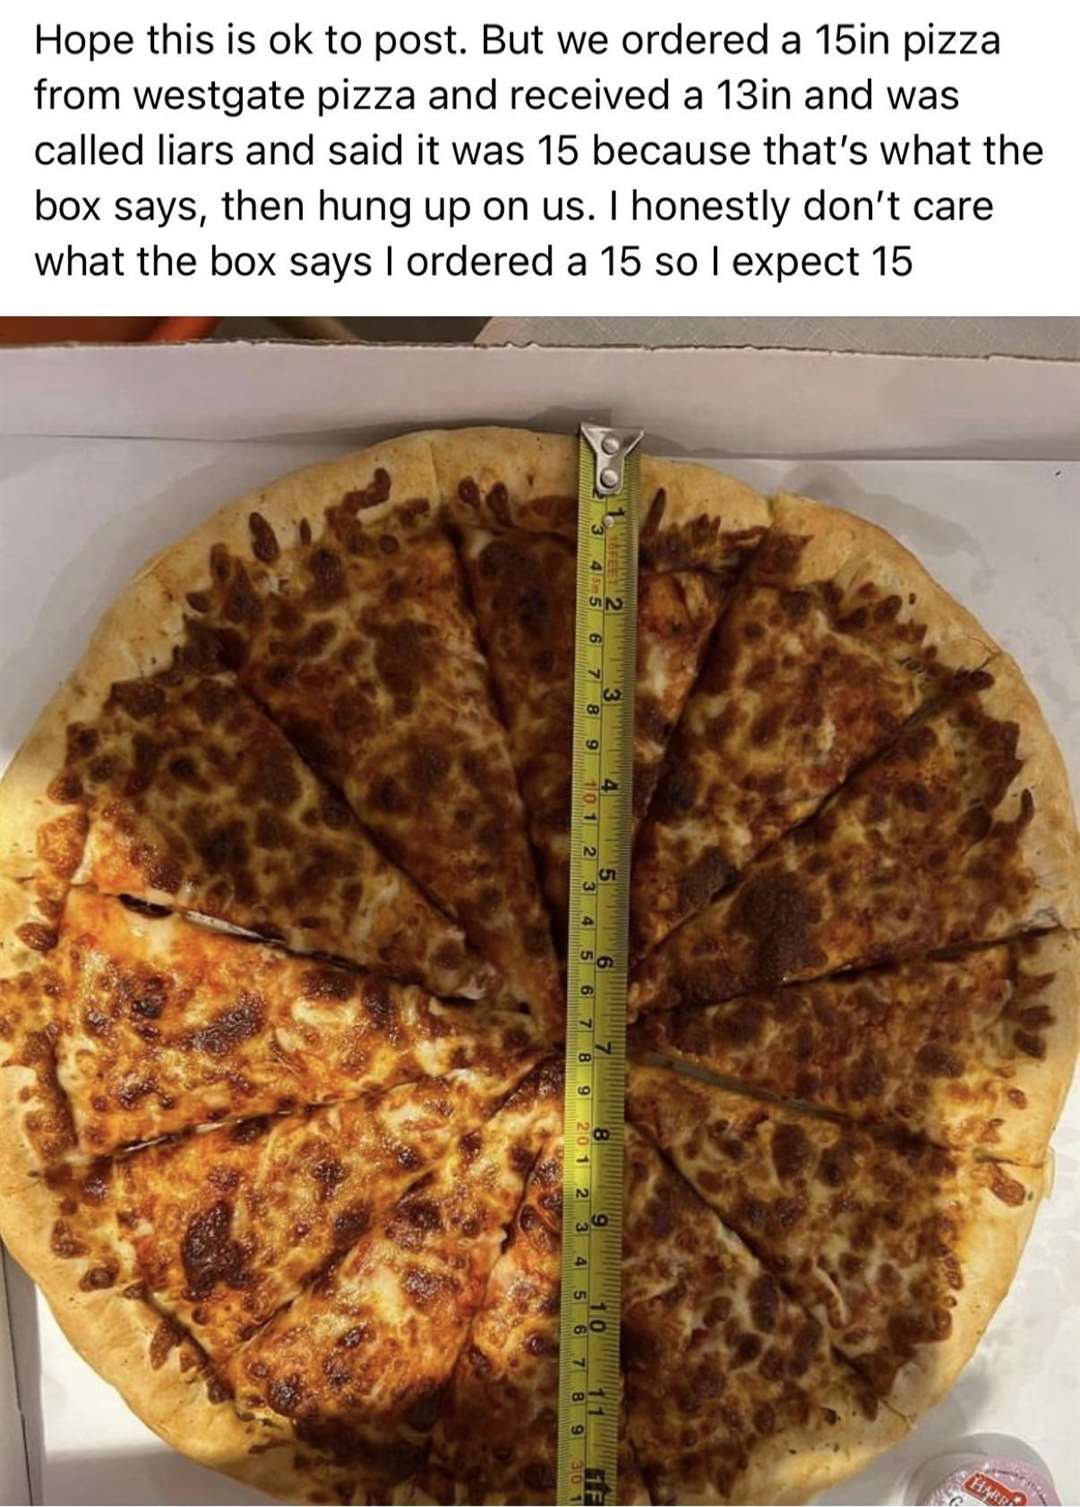 The original post on Facebook blasting the size of the pizza